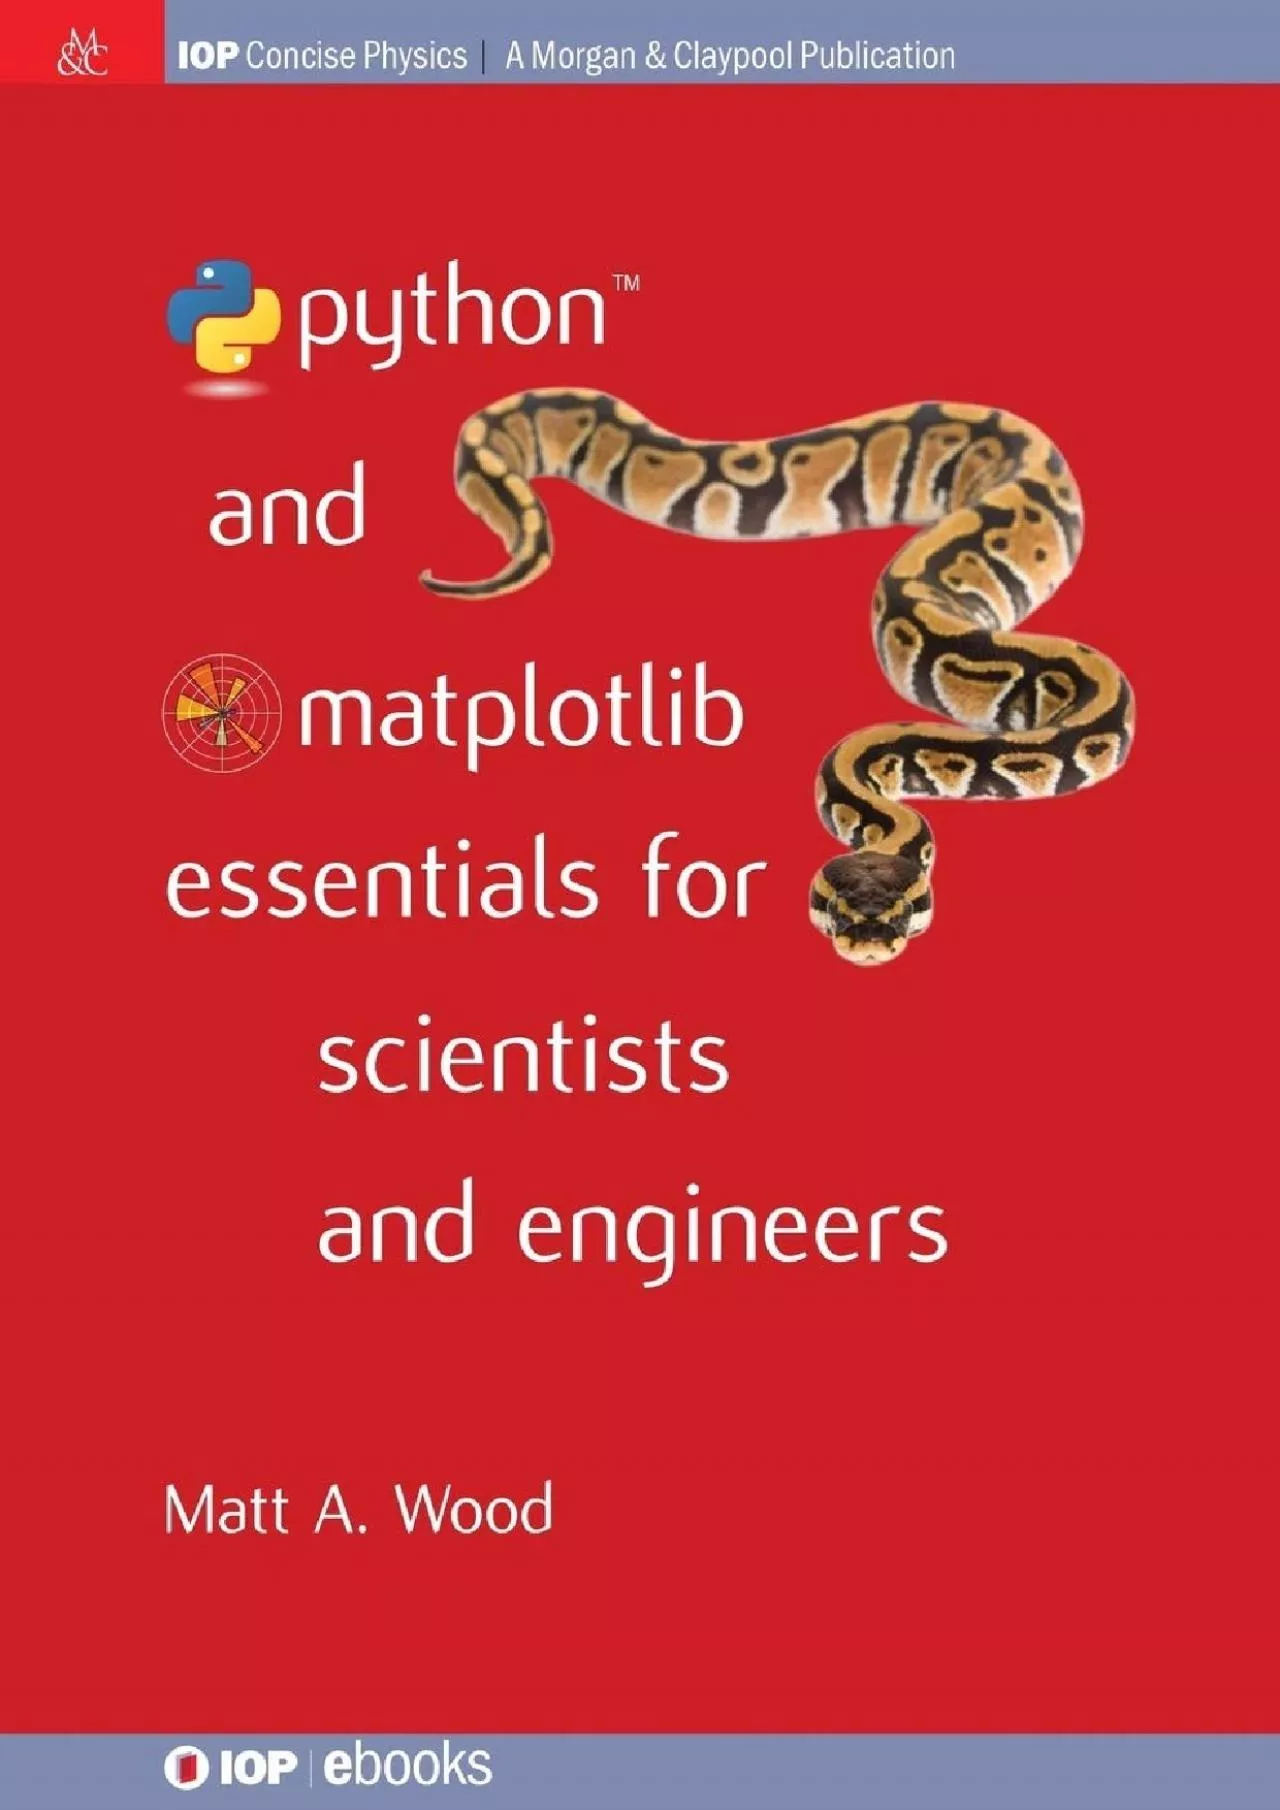 [READING BOOK]-Python and Matplotlib Essentials for Scientists and Engineers (Iop Concise